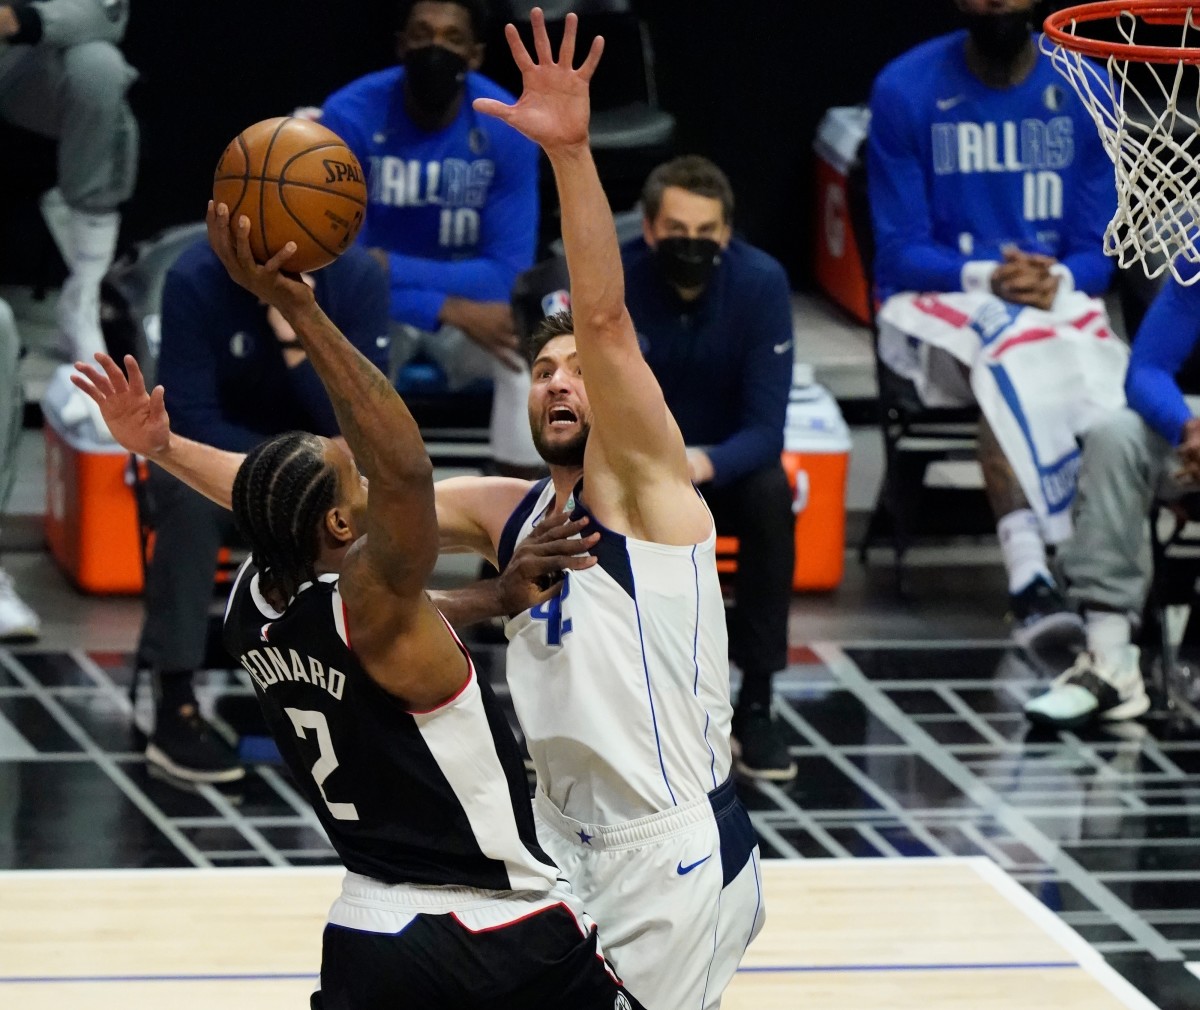 May 22, 2021; Los Angeles, California, USA; LA Clippers forward Kawhi Leonard (2) flies to the basket for a slam dunk over Dallas Mavericks forward Maxi Kleber (42) during the third quarter of game one in the first round of the 2021 NBA Playoffs at Staples Center. Mandatory Credit: Robert Hanashiro-USA TODAY Sports